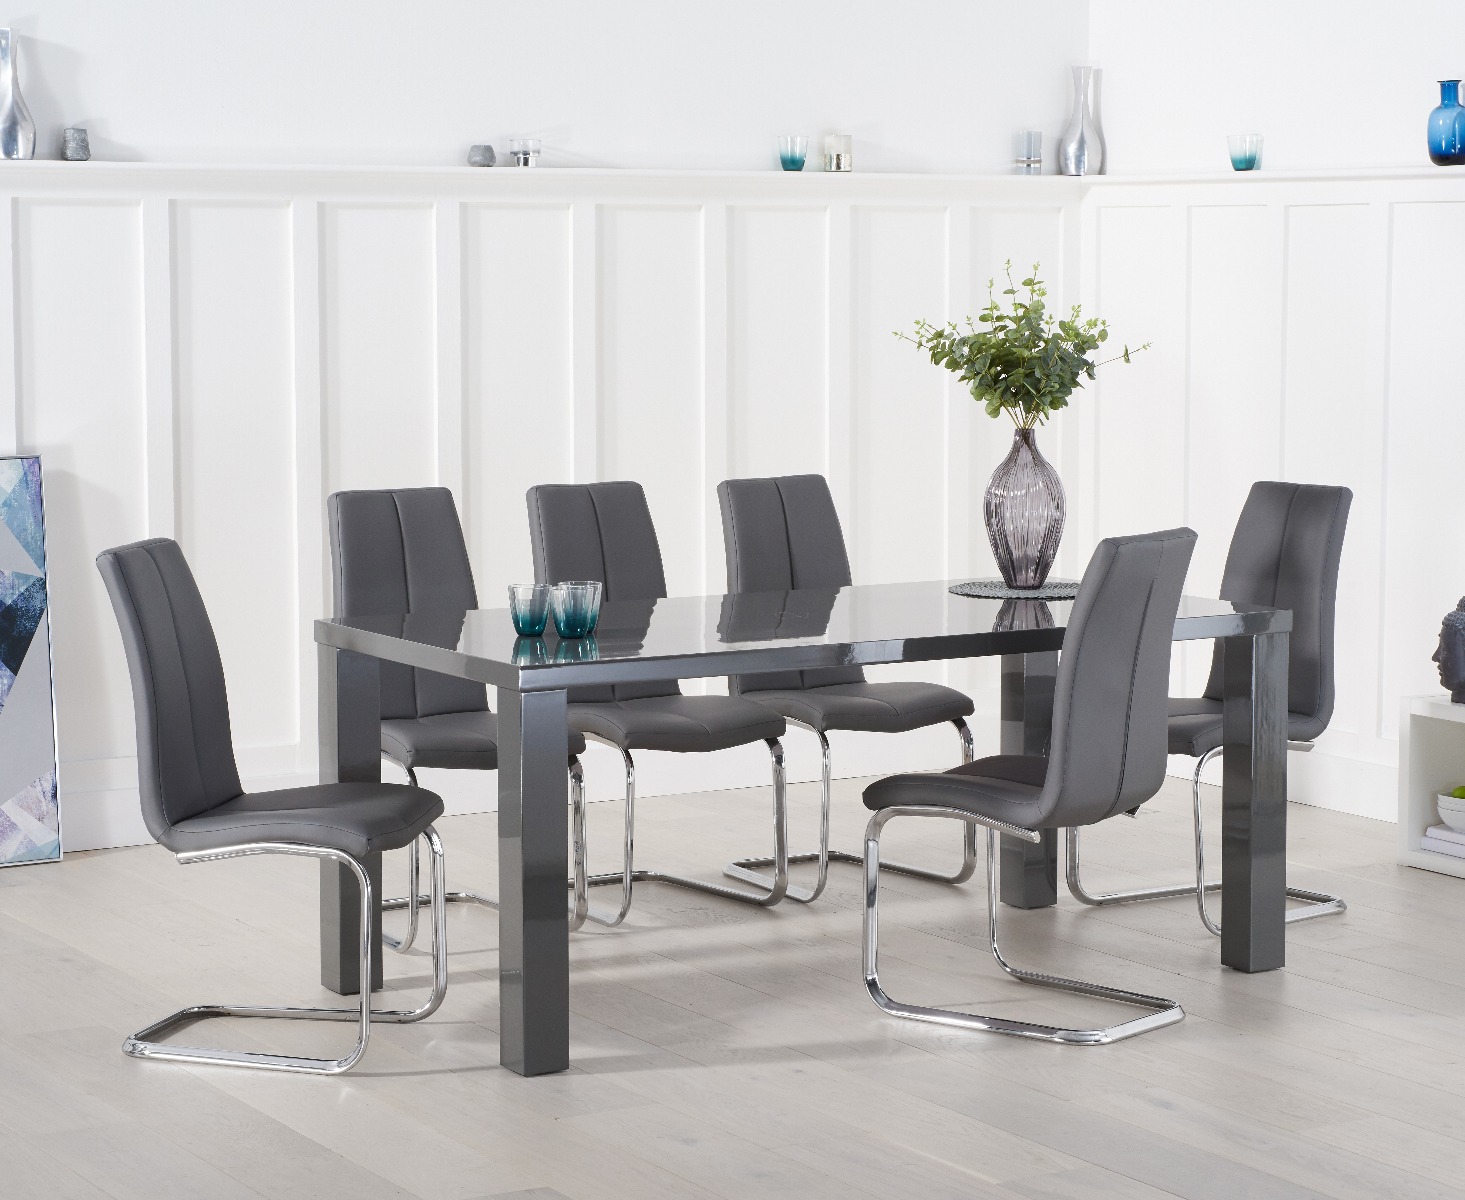 Photo 1 of Atlanta 200cm dark grey high gloss dining table with 6 grey gianni chairs